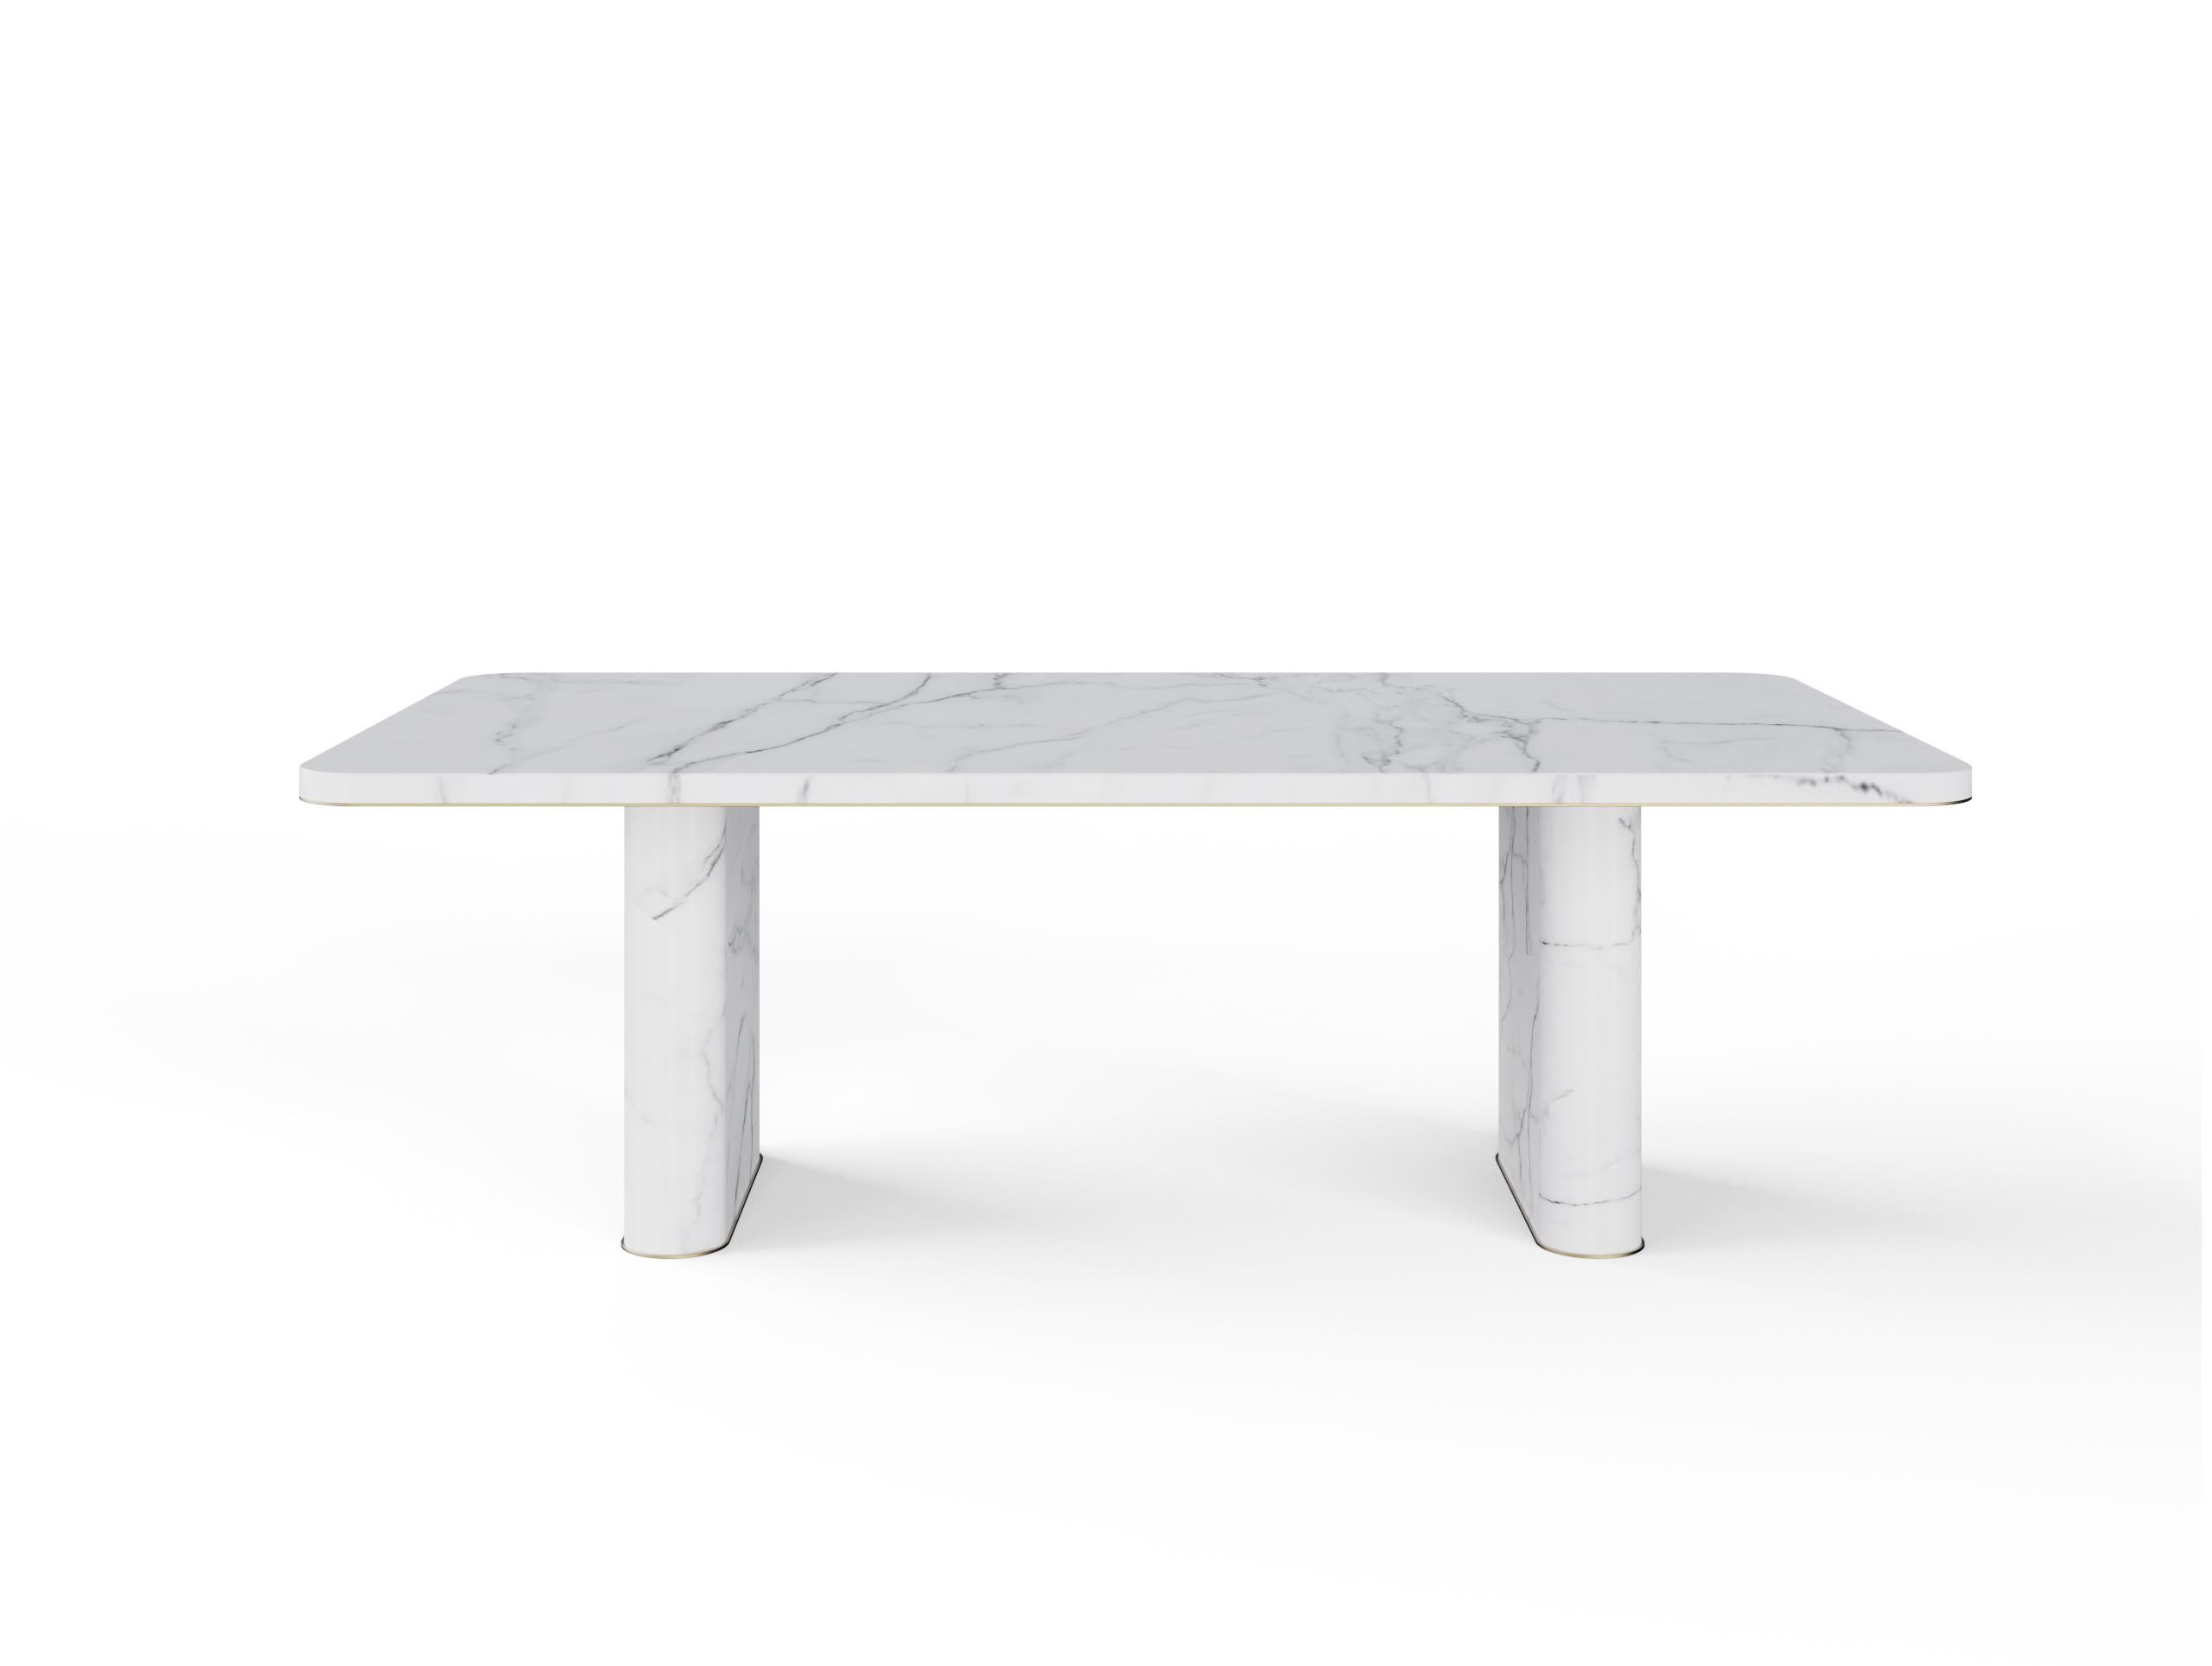 Portuguese Modern Fall Dining Table Calacatta Marble Handmade in Portugal by Greenapple For Sale